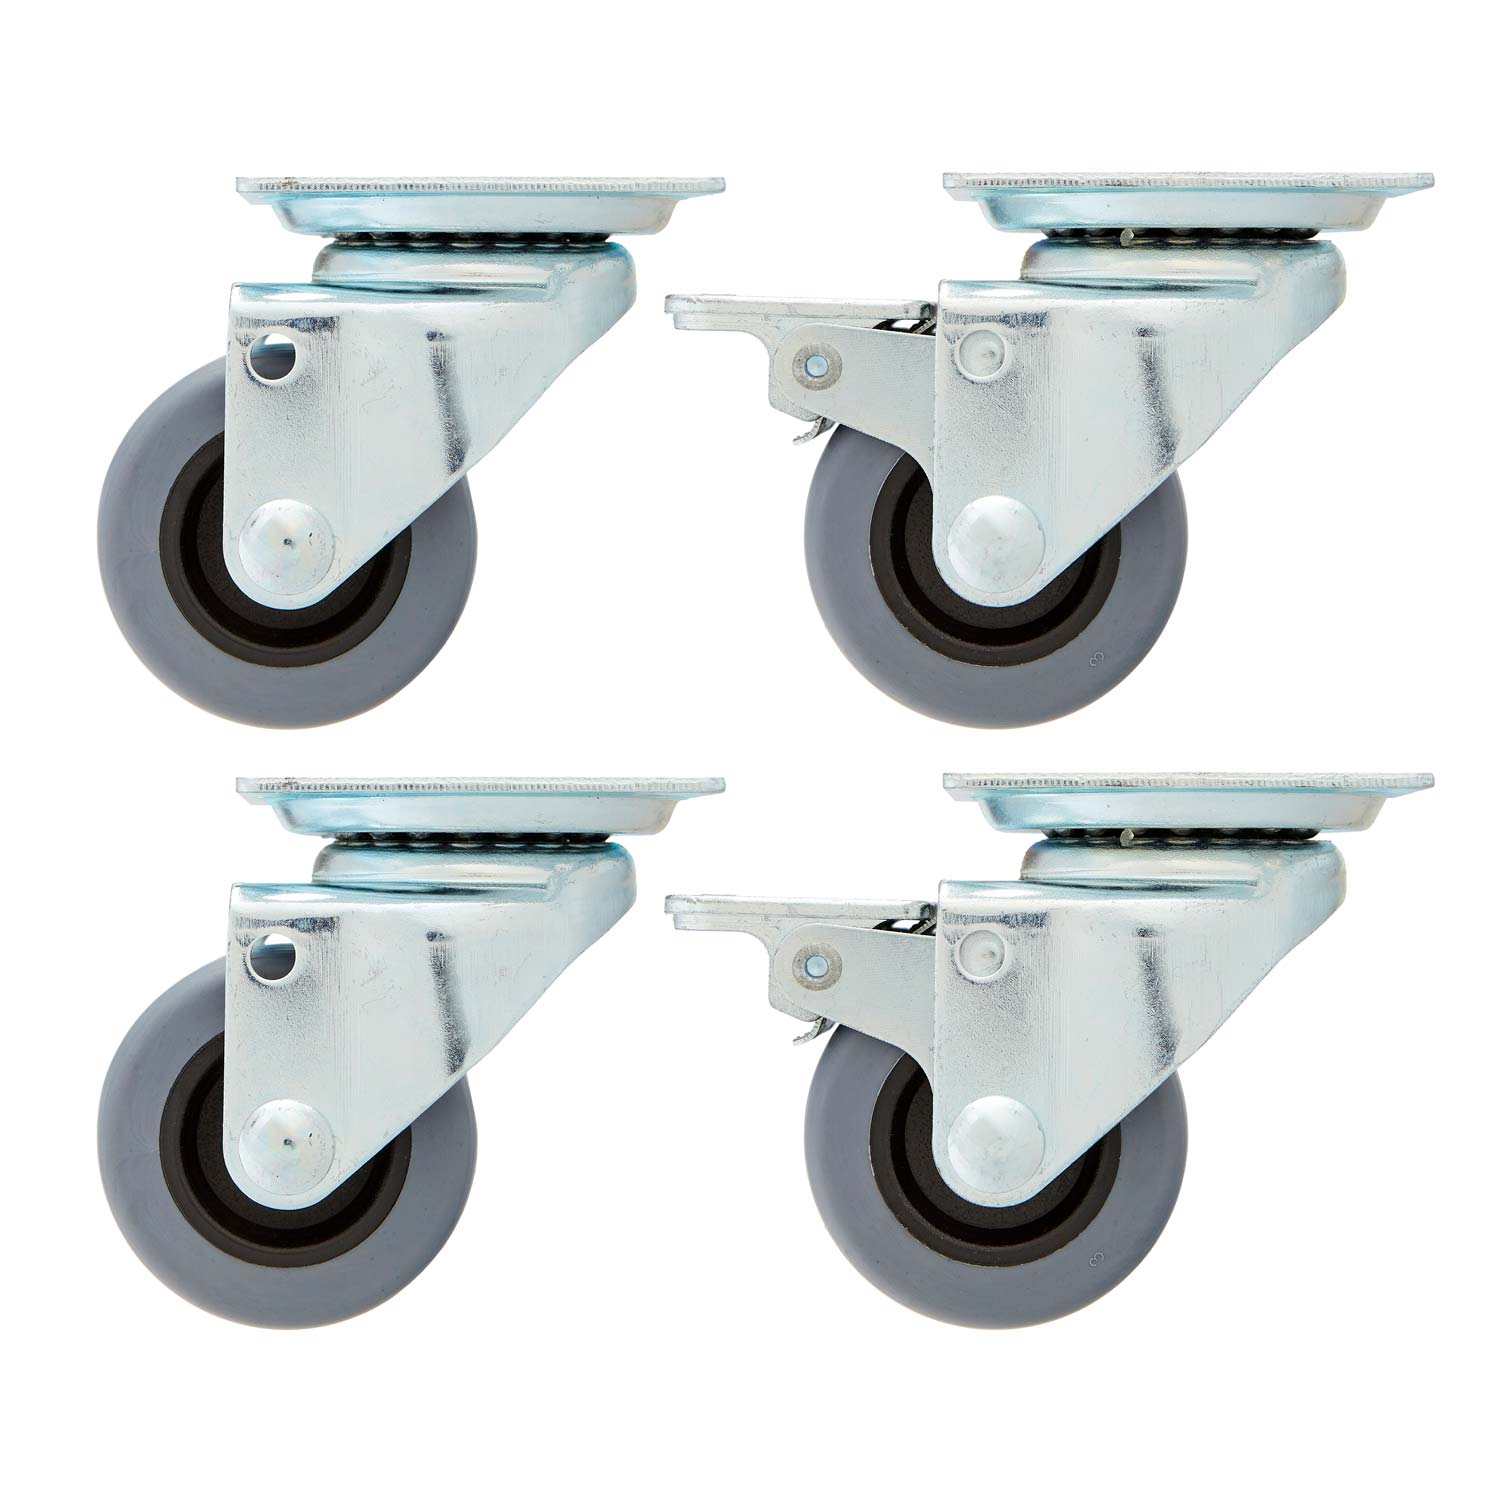 Twin Wheel Castors for Aviation Boxes (Set of 4)